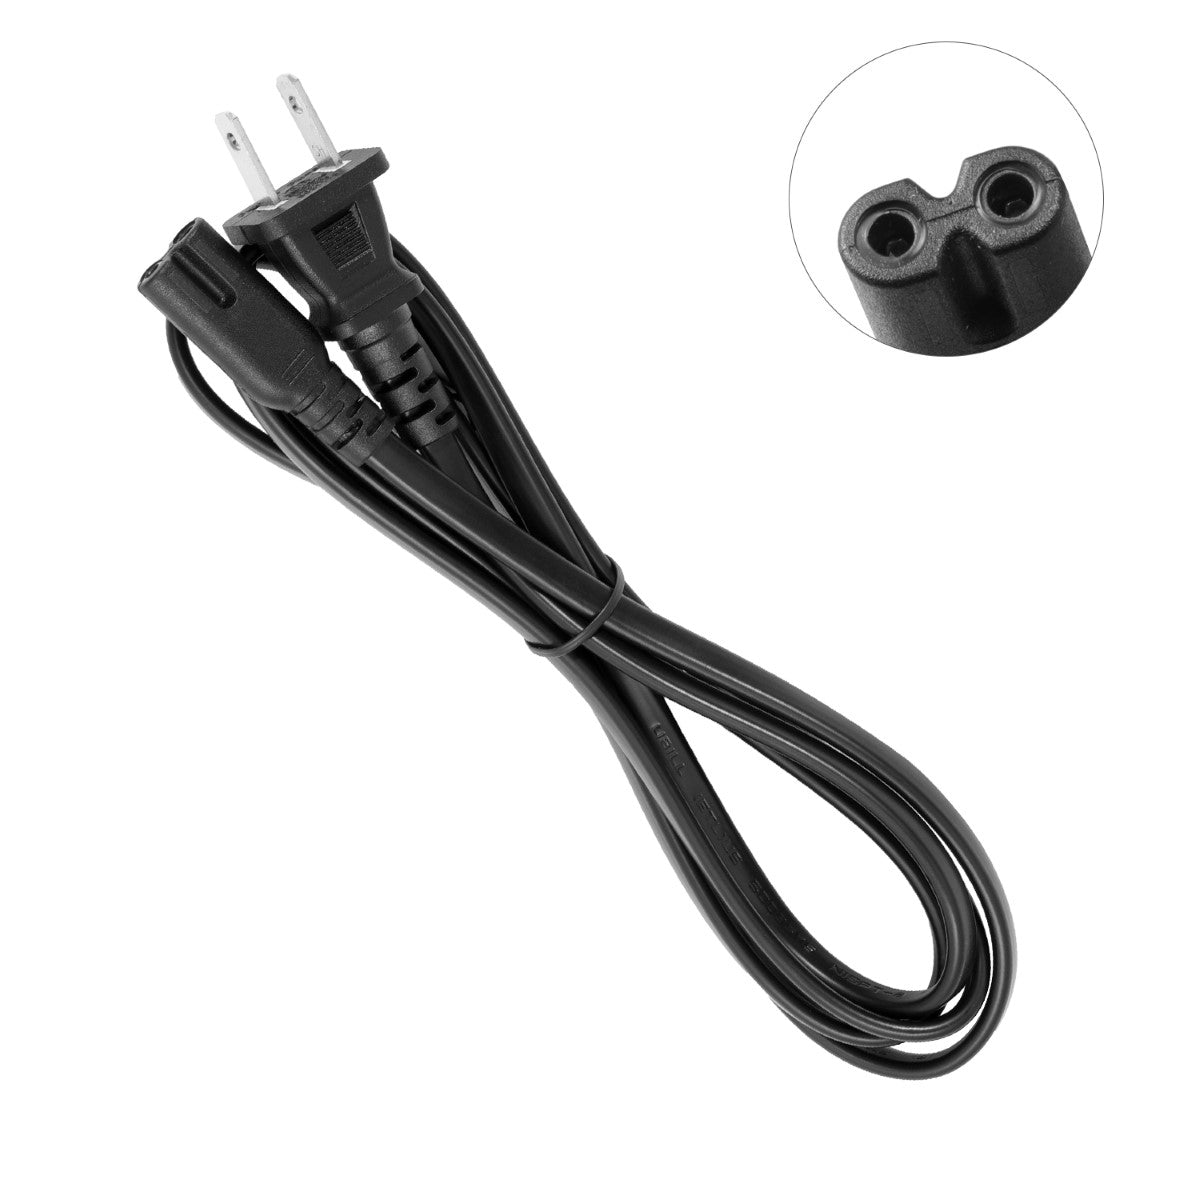 Power Cord for HP ENVY 5535 e-All-in-One Printer.